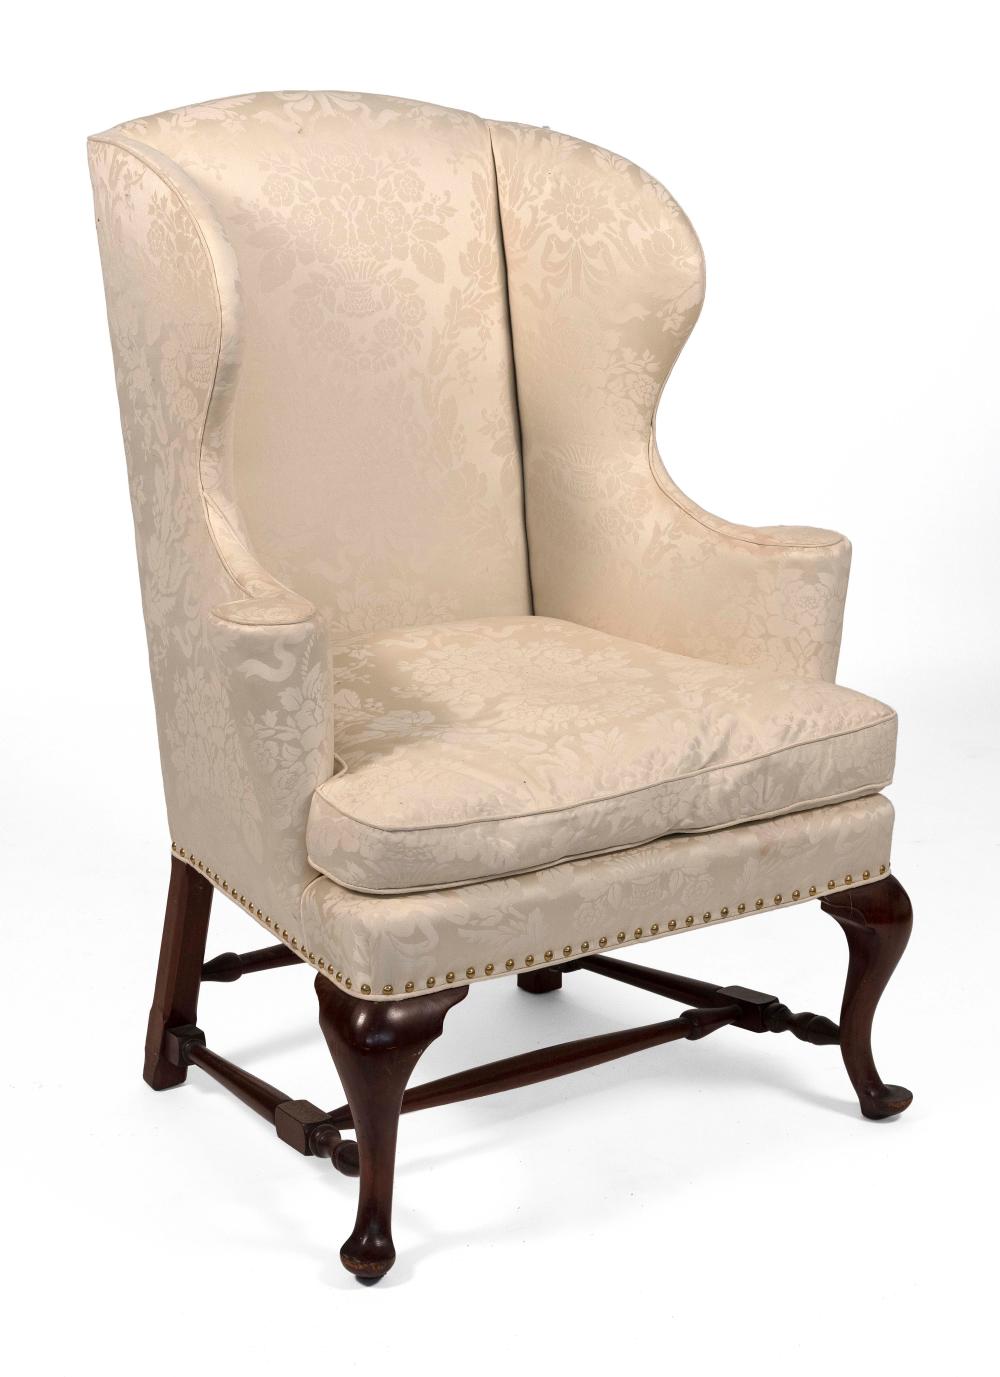 BOSTON QUEEN ANNE STYLE WING CHAIR 34d4fc